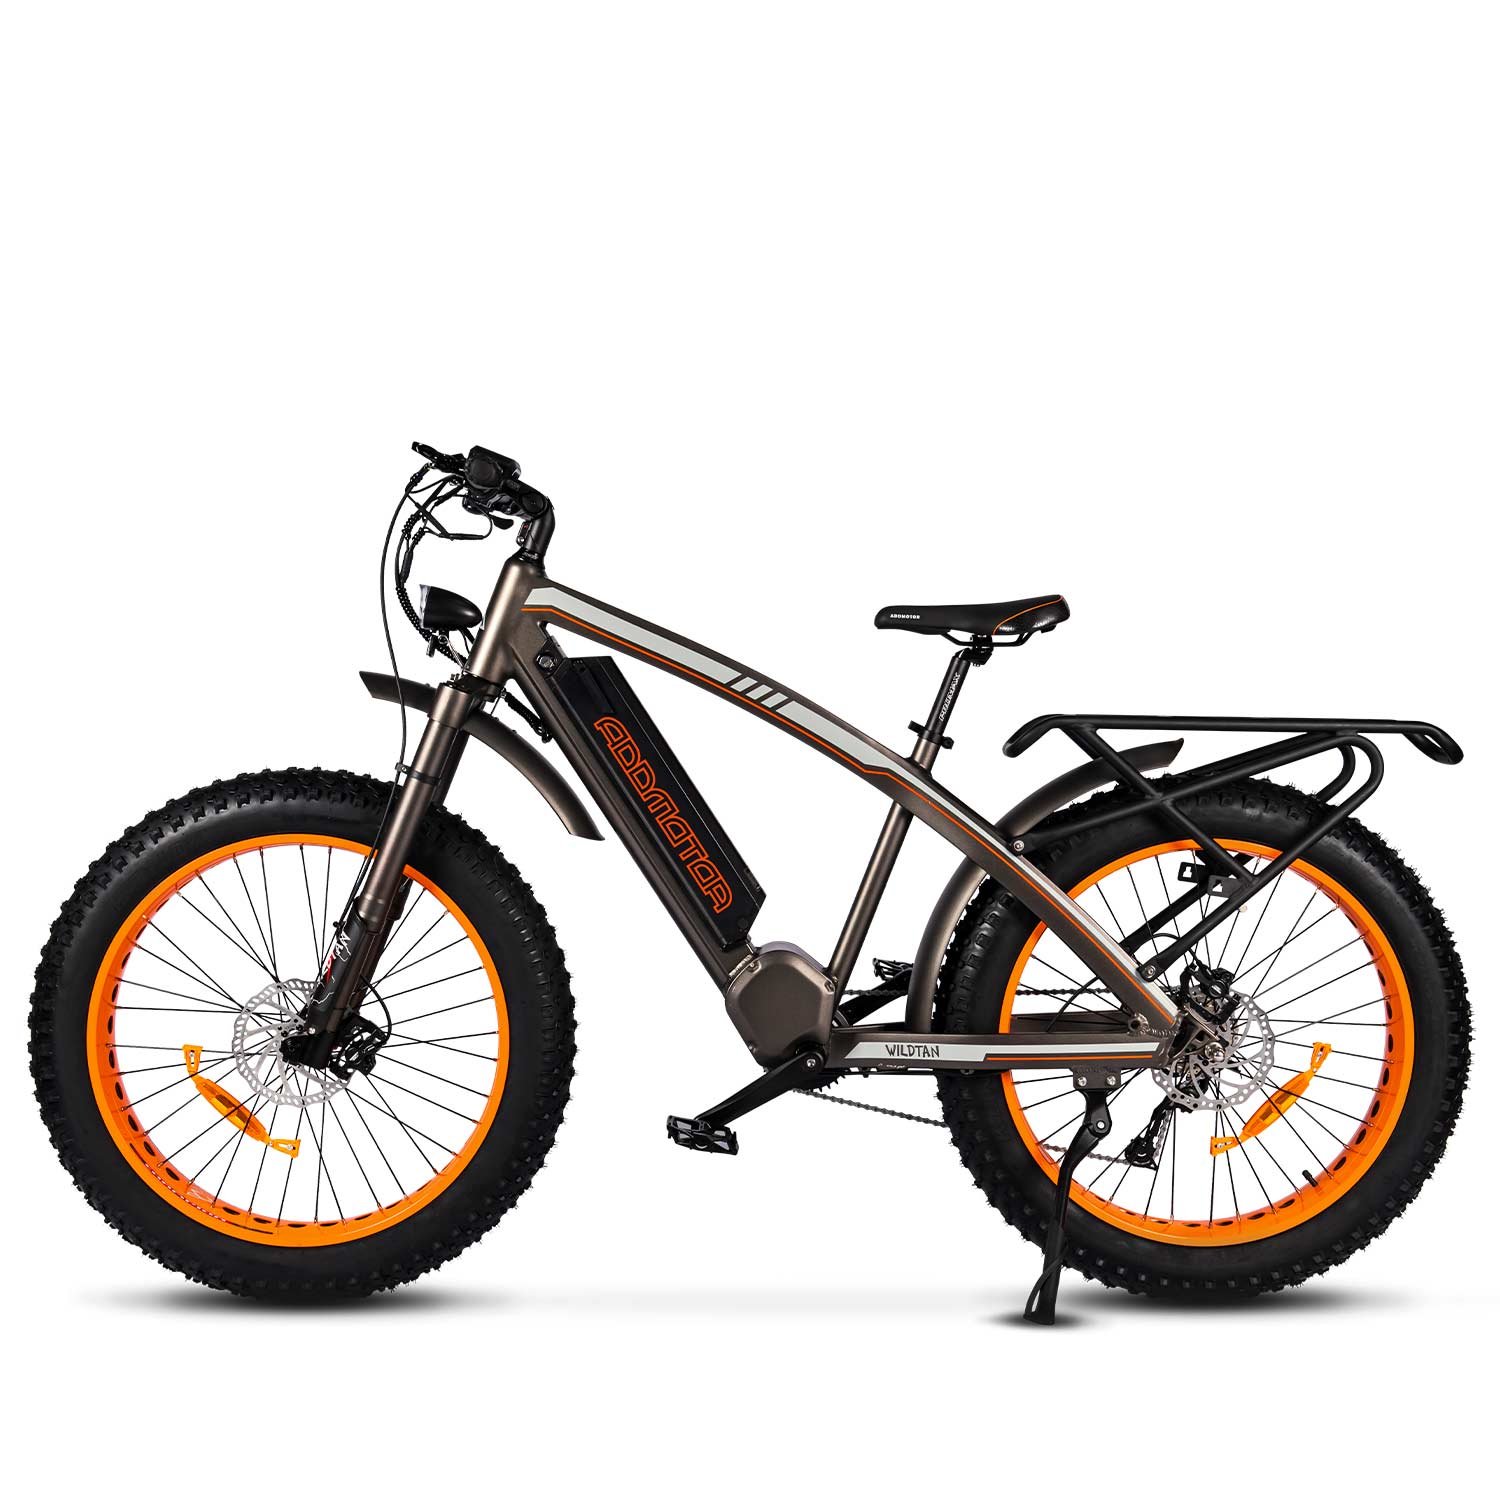 Addmotor Wildtan M-5600 - Electric Bikes for Sale